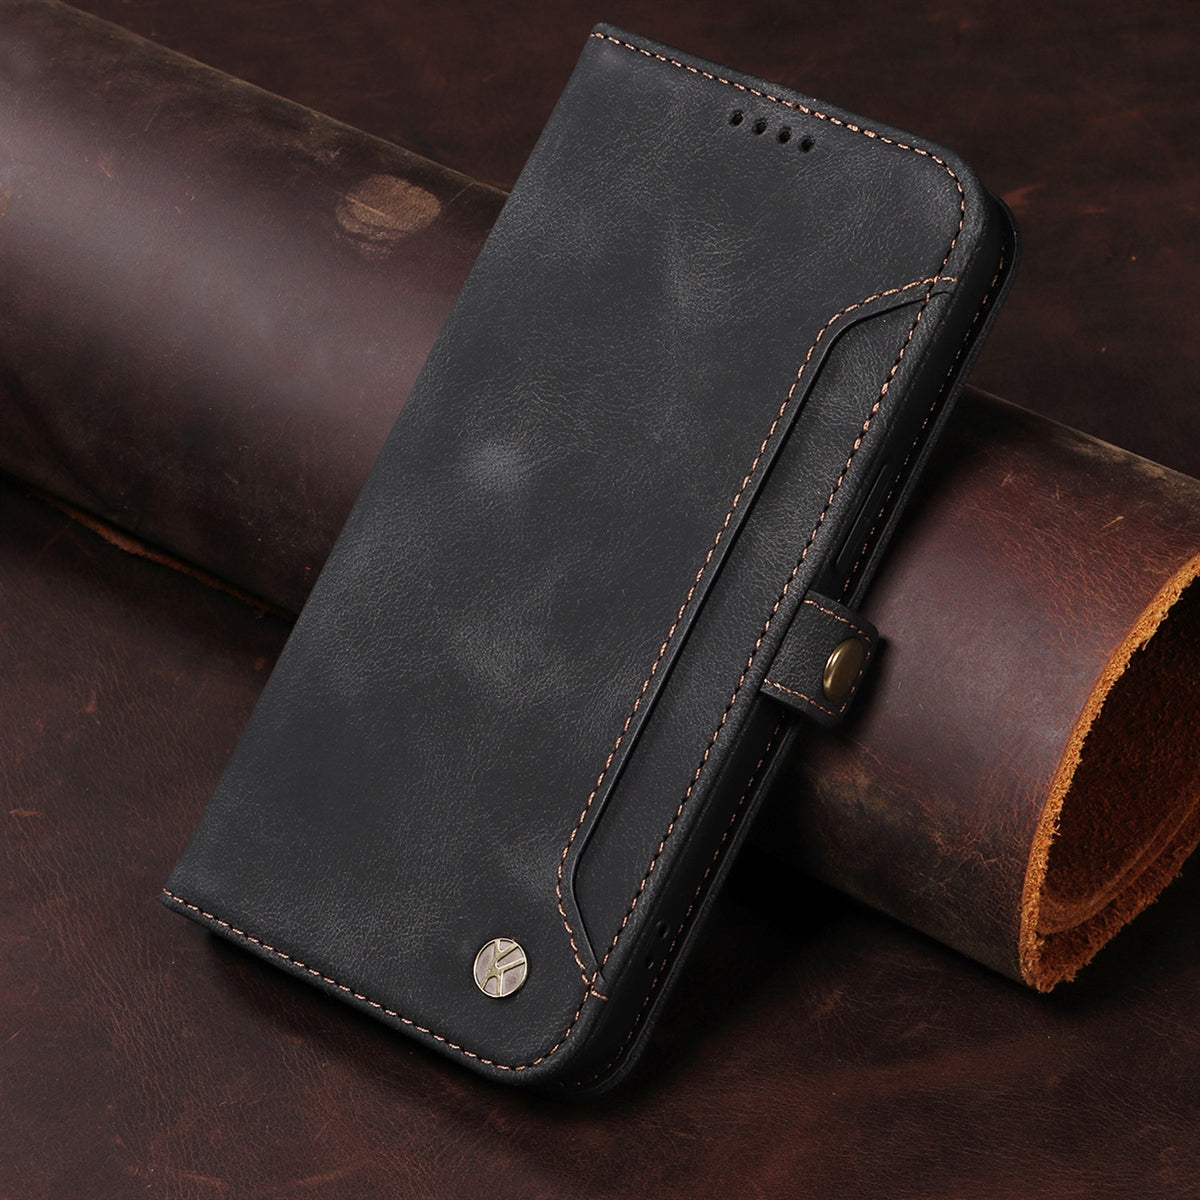 For Apple iPhone 11 Aokus YK Series Leather Wallet Case Black